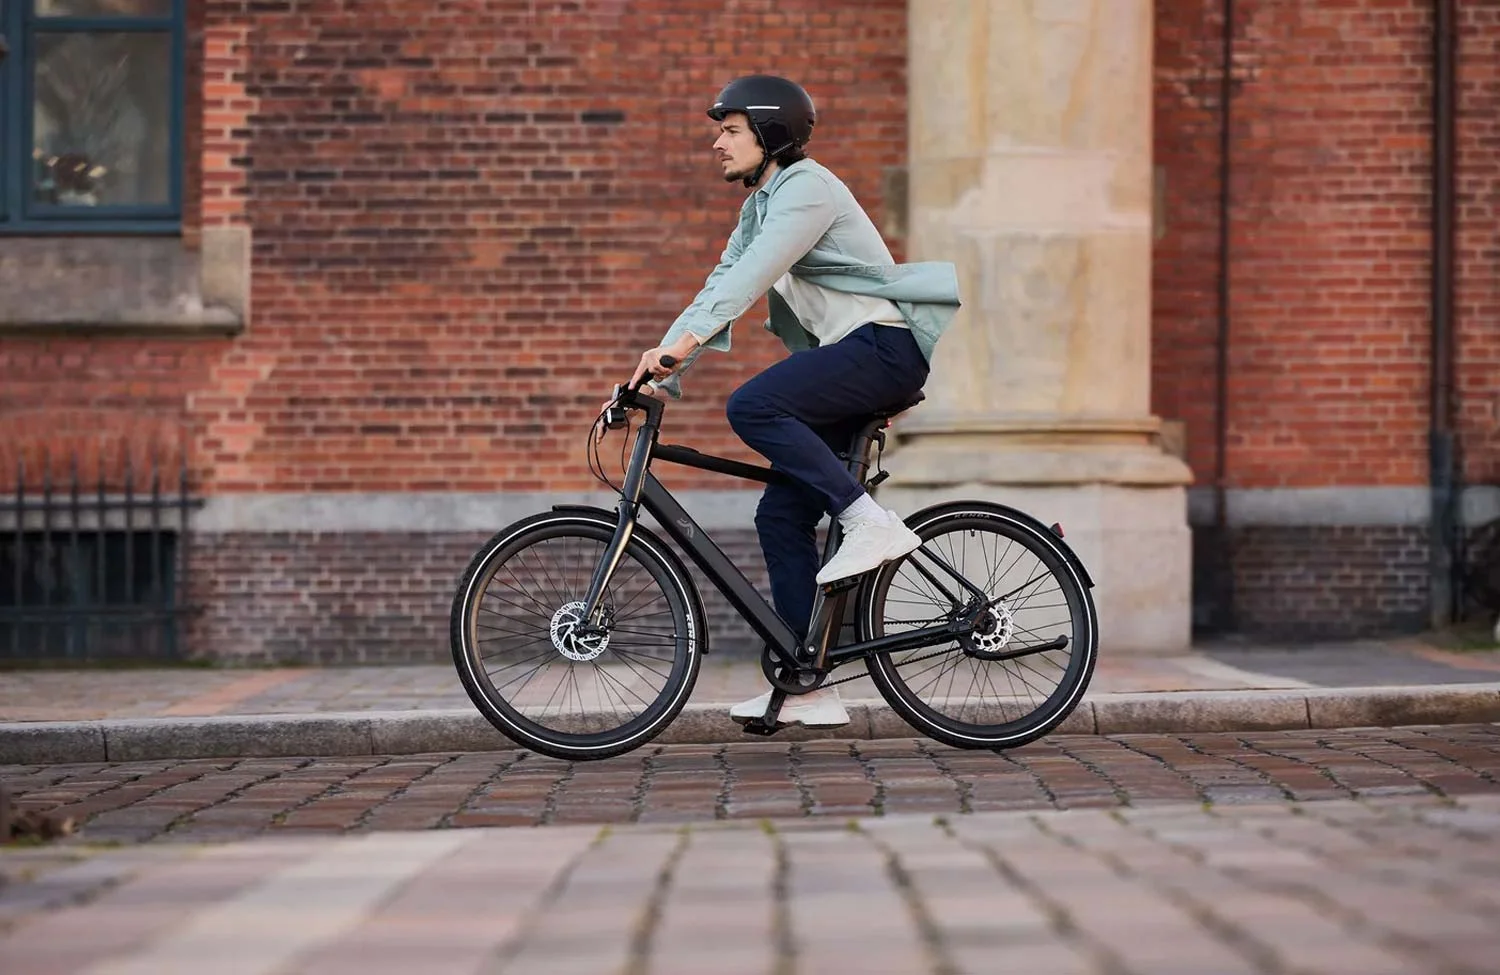 On sale again: the Urban Lidl — e-bike for is available euros! 1,199 currently